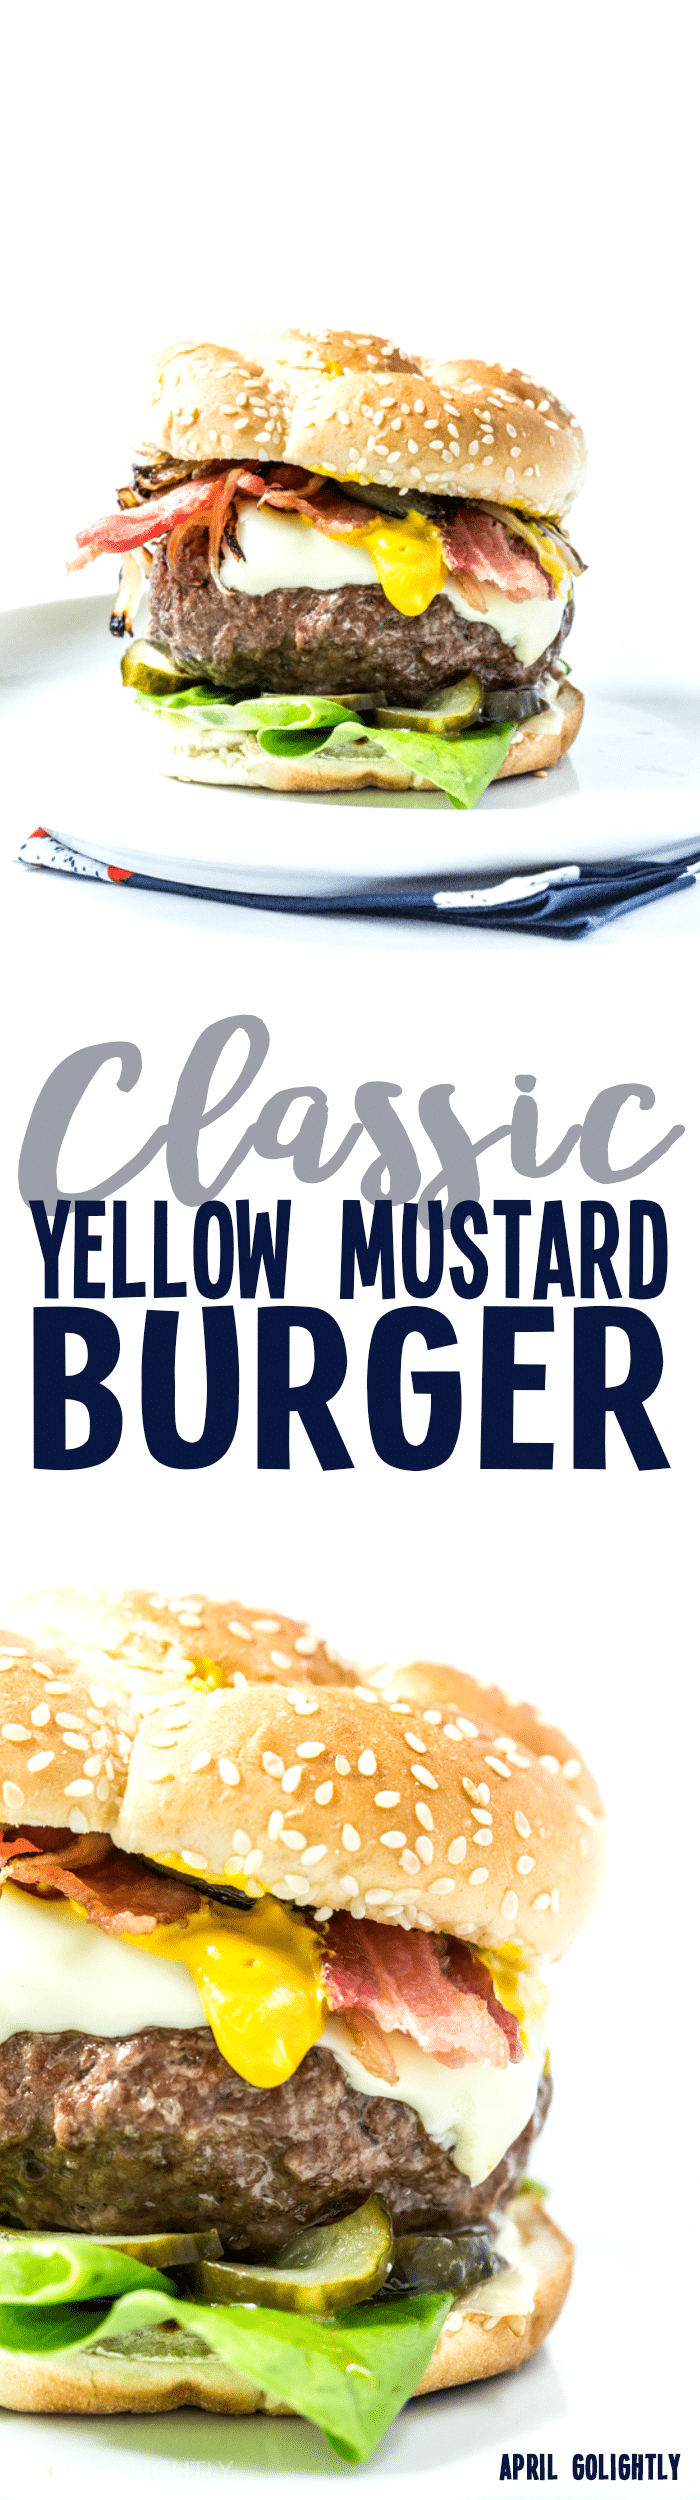 Classic Yellow Mustard Burger made with Beef Patties and French's Yellow Stoneground Mustard grilled and served with sautéed shallots, bacon, white American cheese, and diced pickles